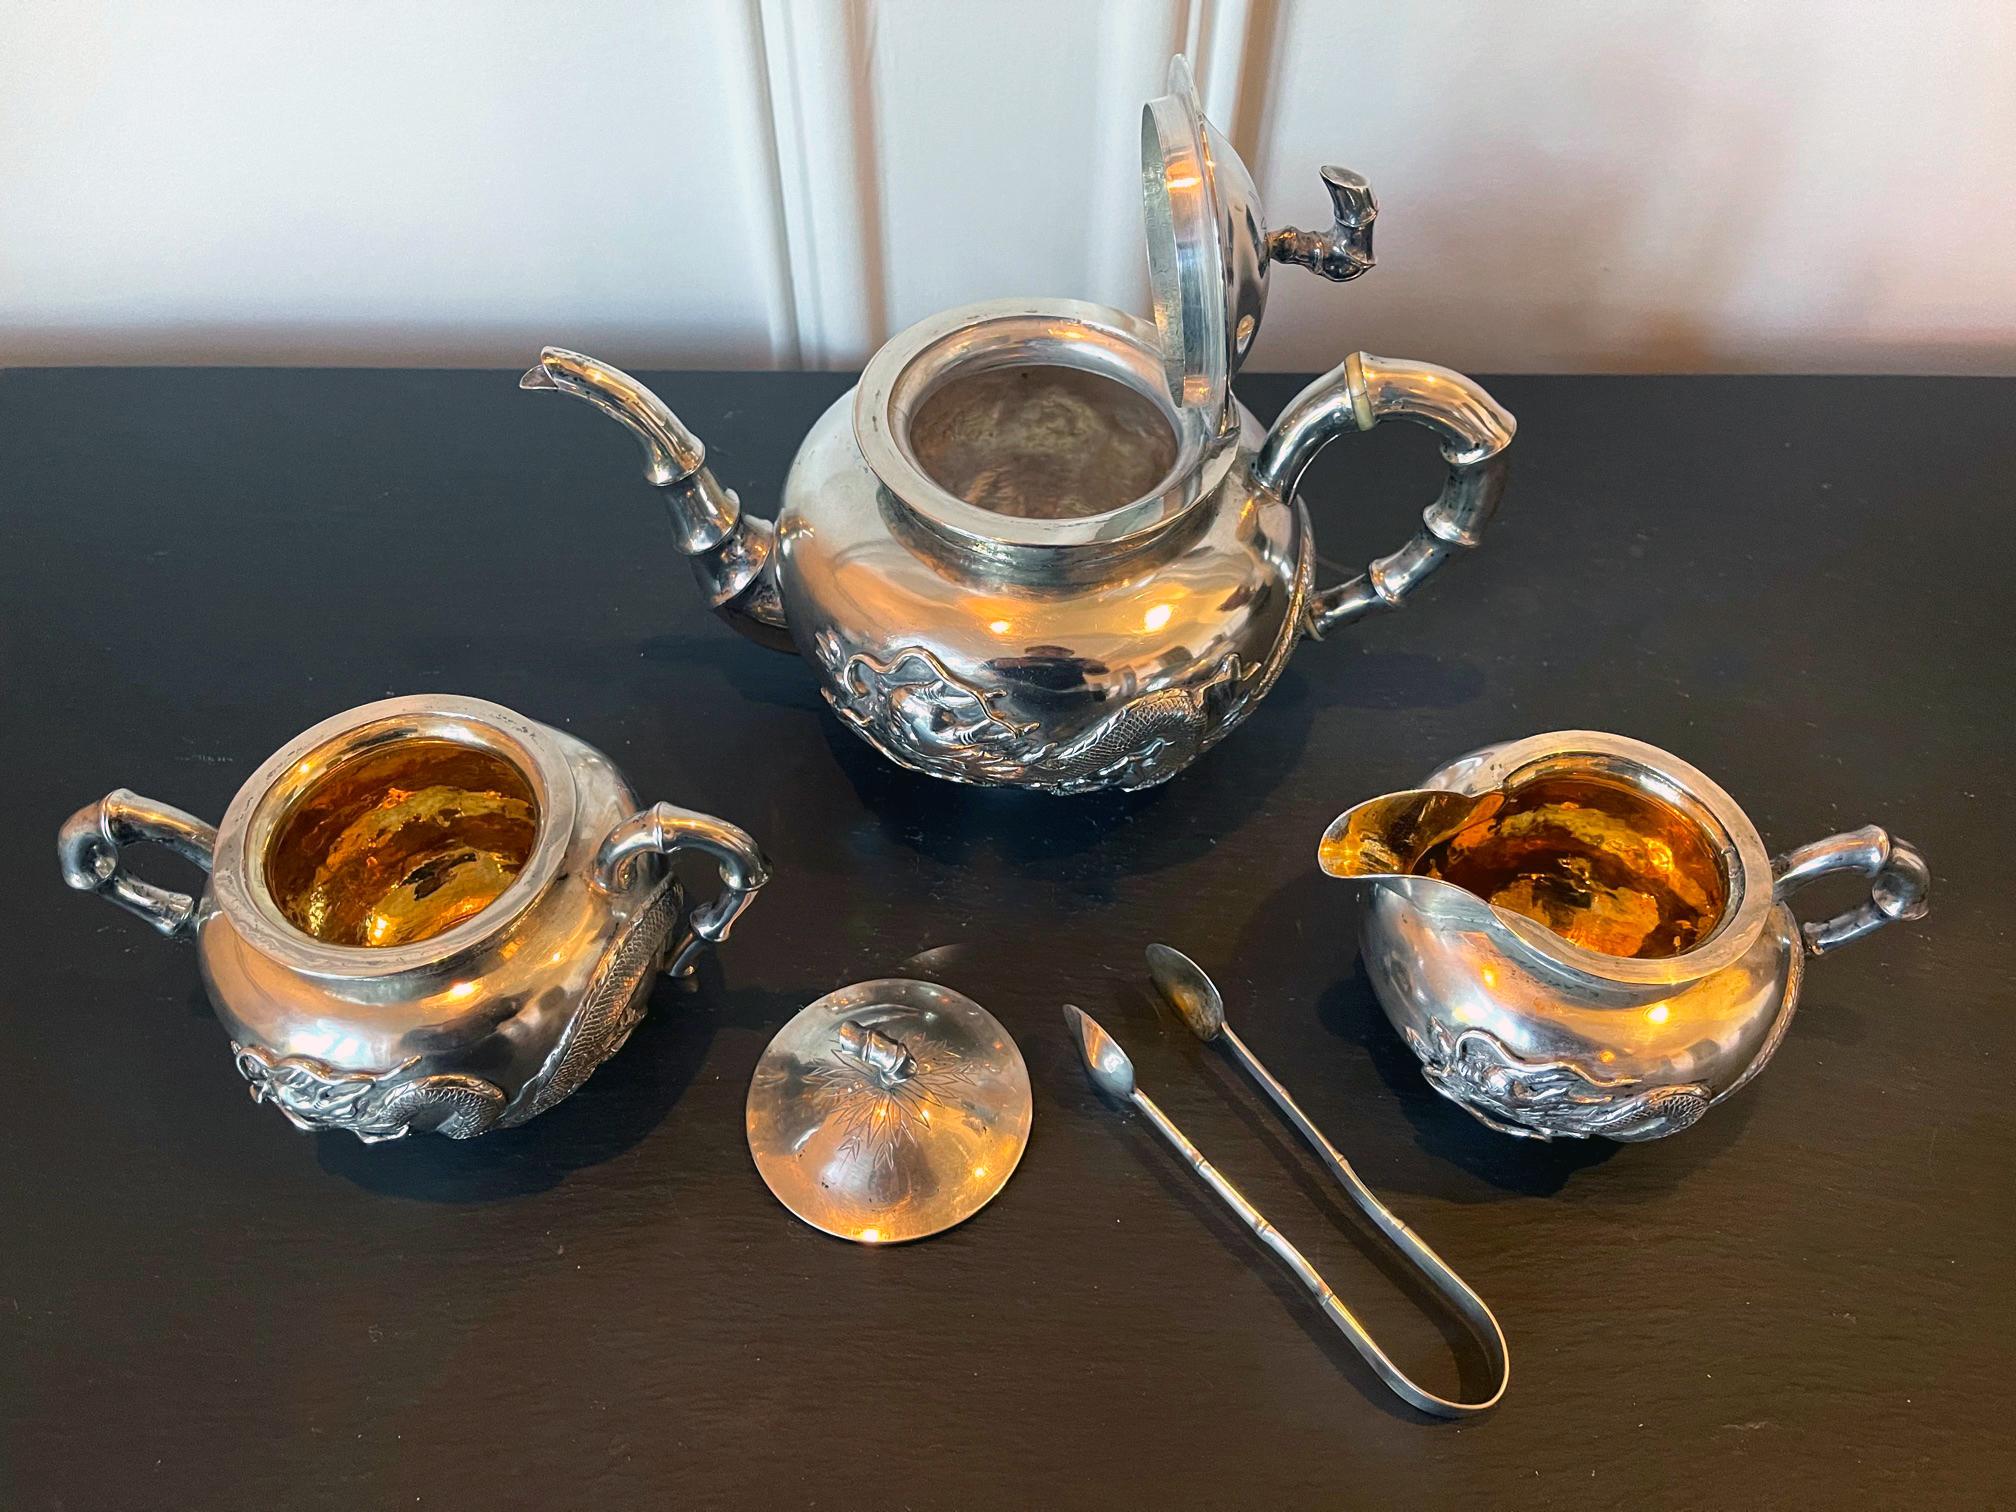 A four piece Chinese export silver tea service set consists of a lidded teapot, a creamer with lid, an open sugar and a tongs. The set was retailed by Zee Wo, a silver retailer located in Shanghai at 121 and 370 Henan Road and operated circa